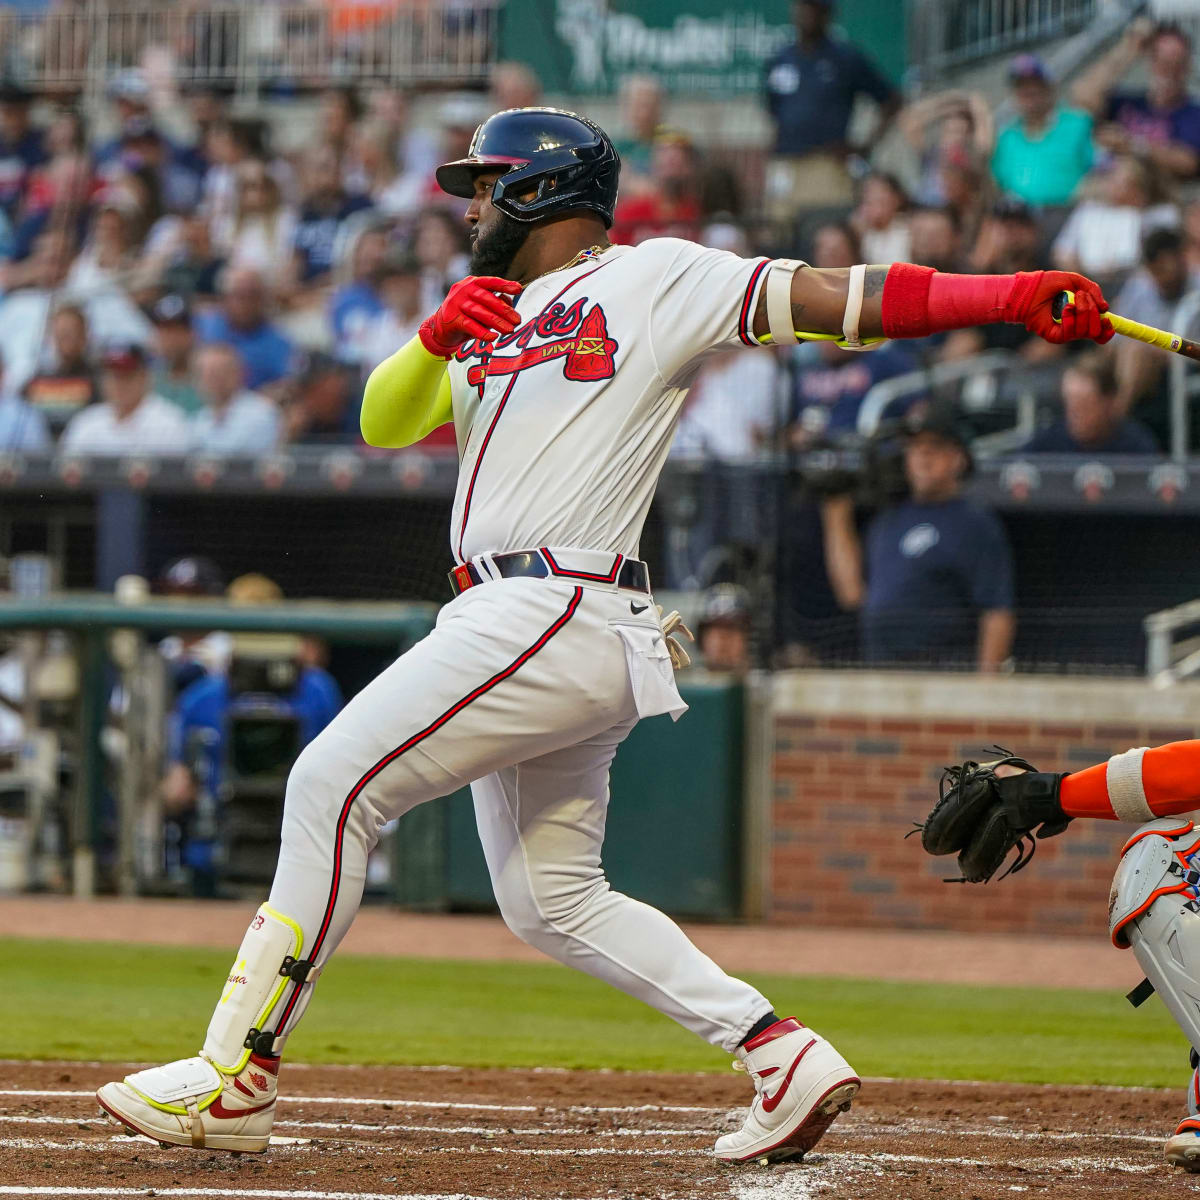 Atlanta Braves analysis: This team has been completely dominant in